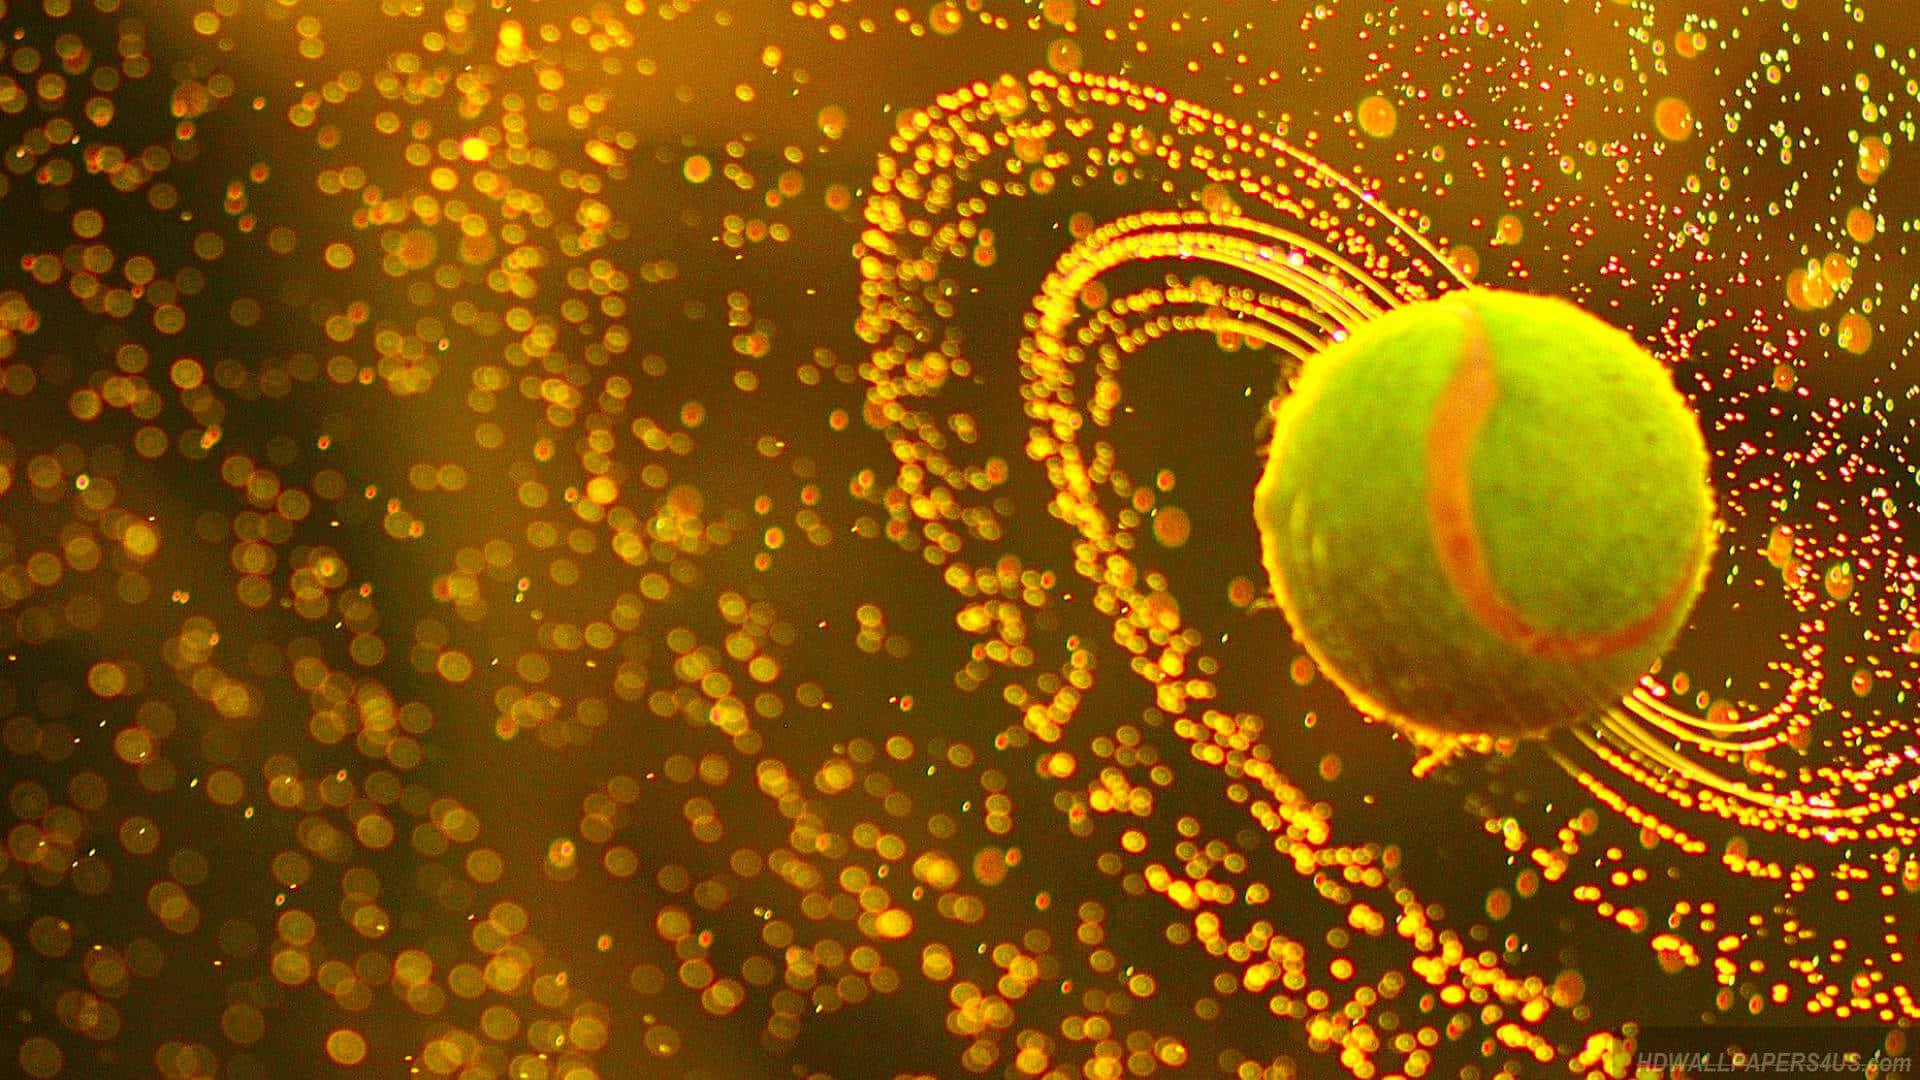 A Bright Tennis Ball Sitting On the Court Wallpaper